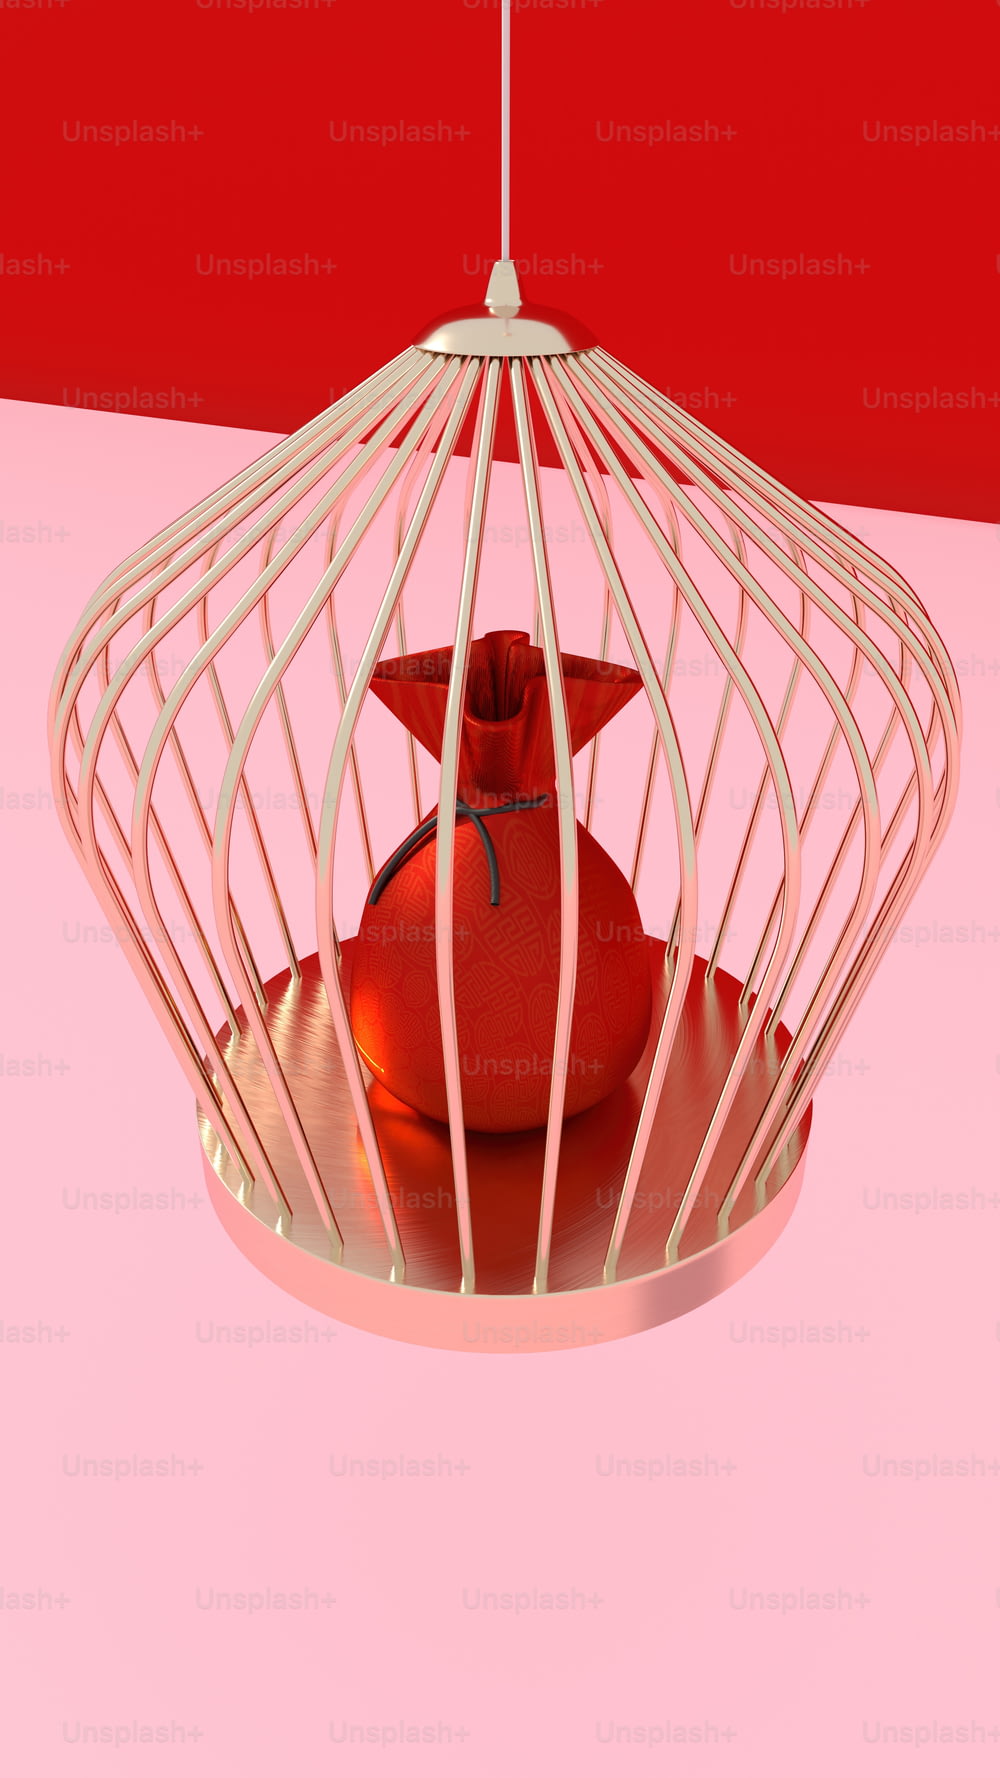 a bird in a cage on a pink surface